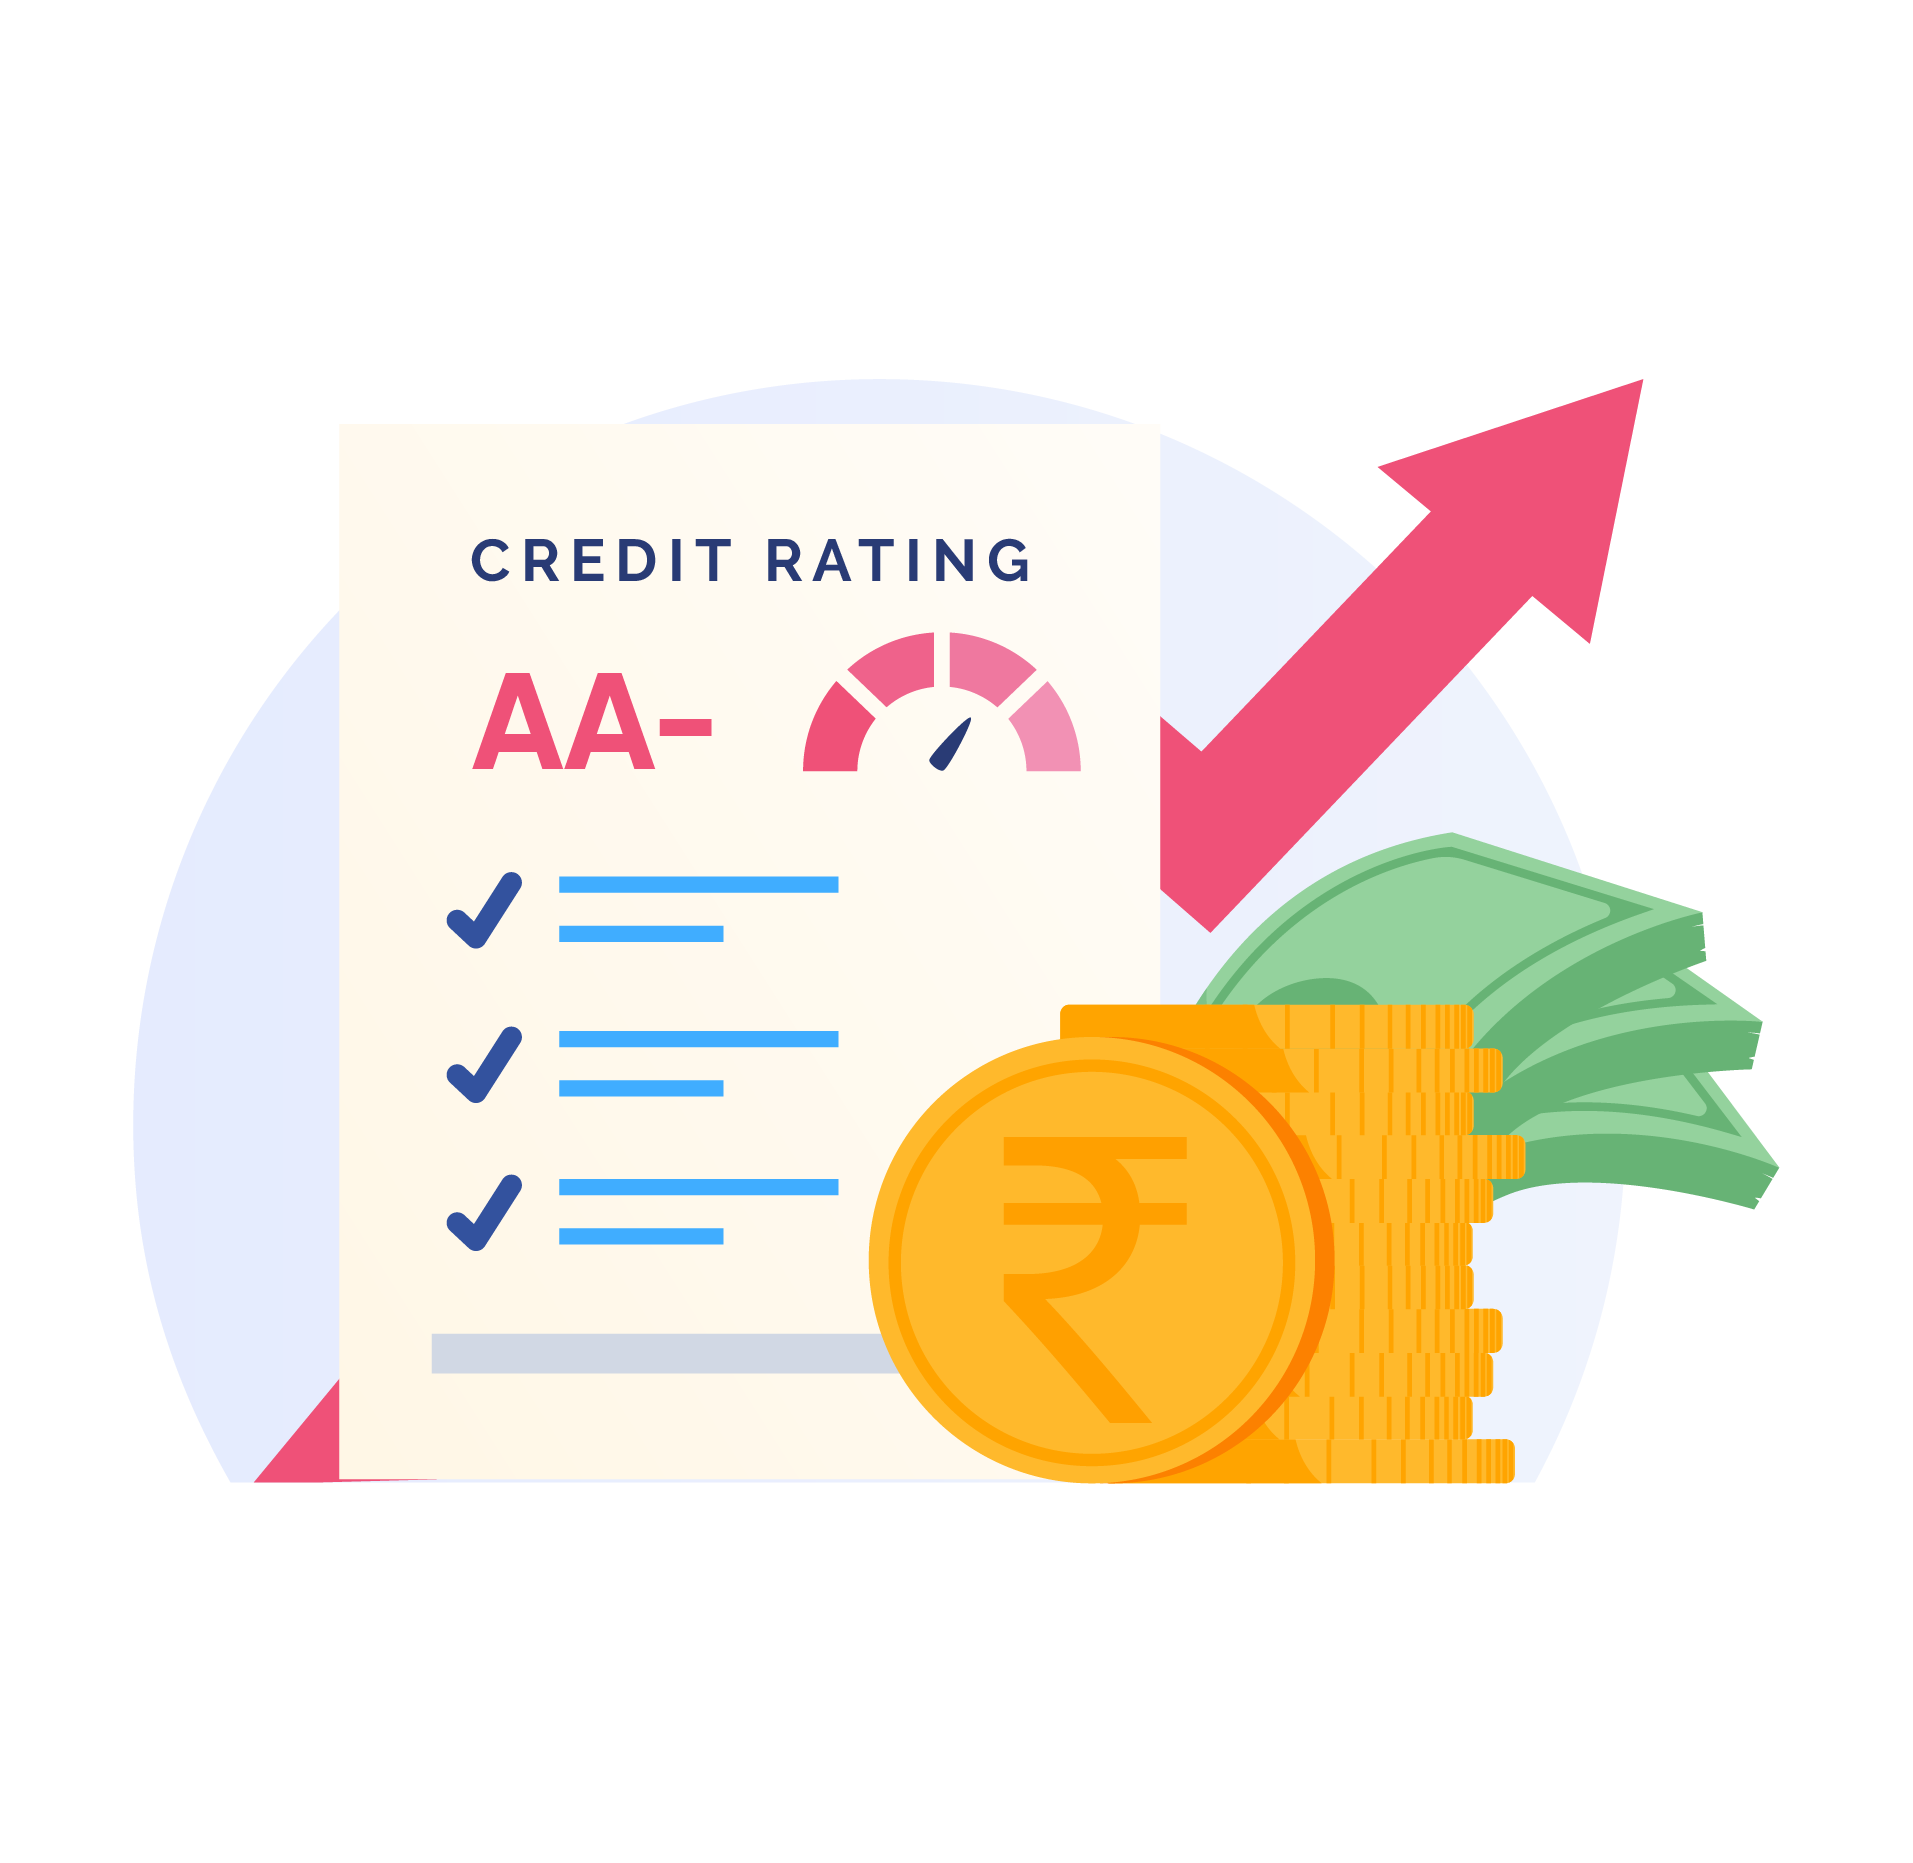 Credit rating agencies (CRAs) help small businesses get loans with low interest rates by assessing and evaluating their creditworthiness and ability to repay the loans. In this article, we discuss the impact of credit rating agencies on the economy.